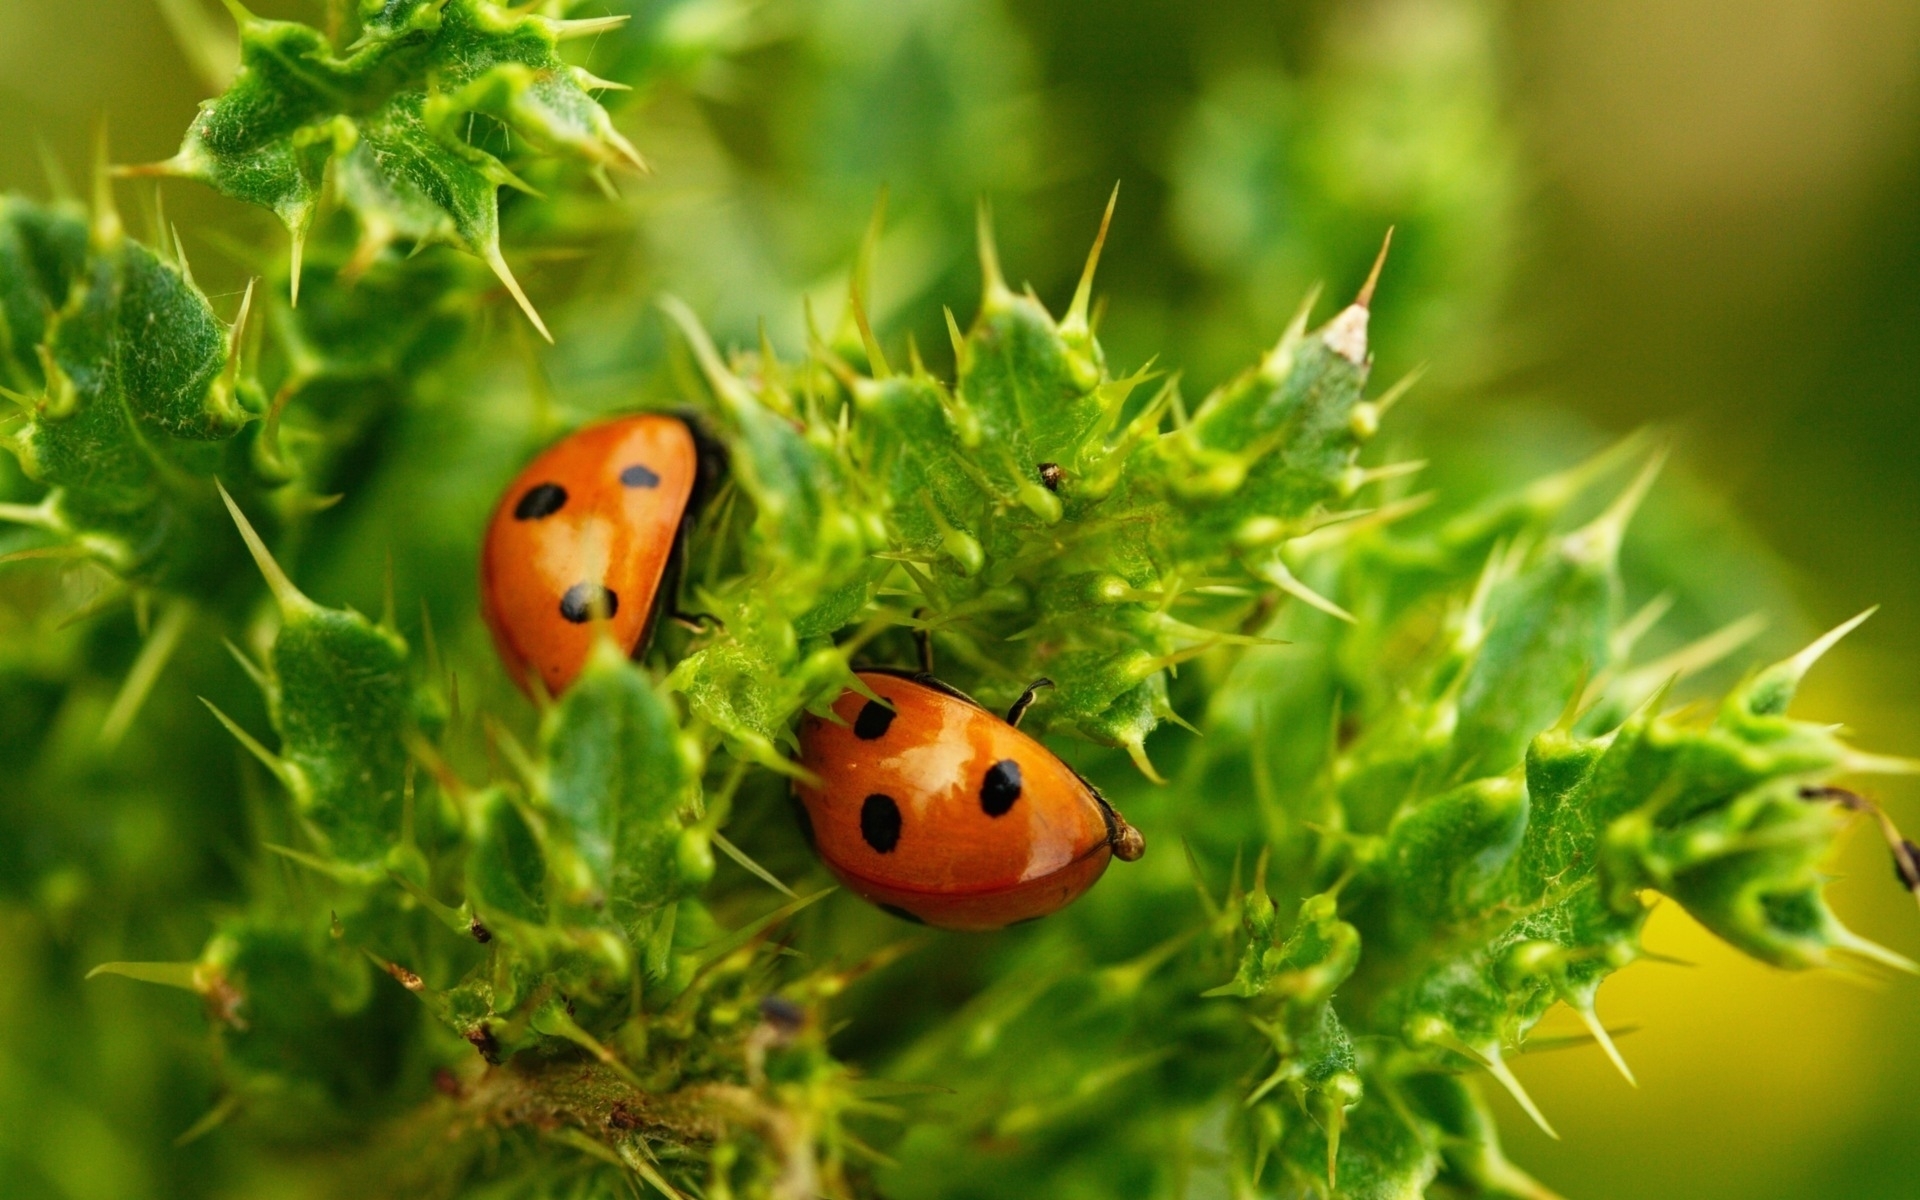 Windows Backgrounds insects, ladybugs, green